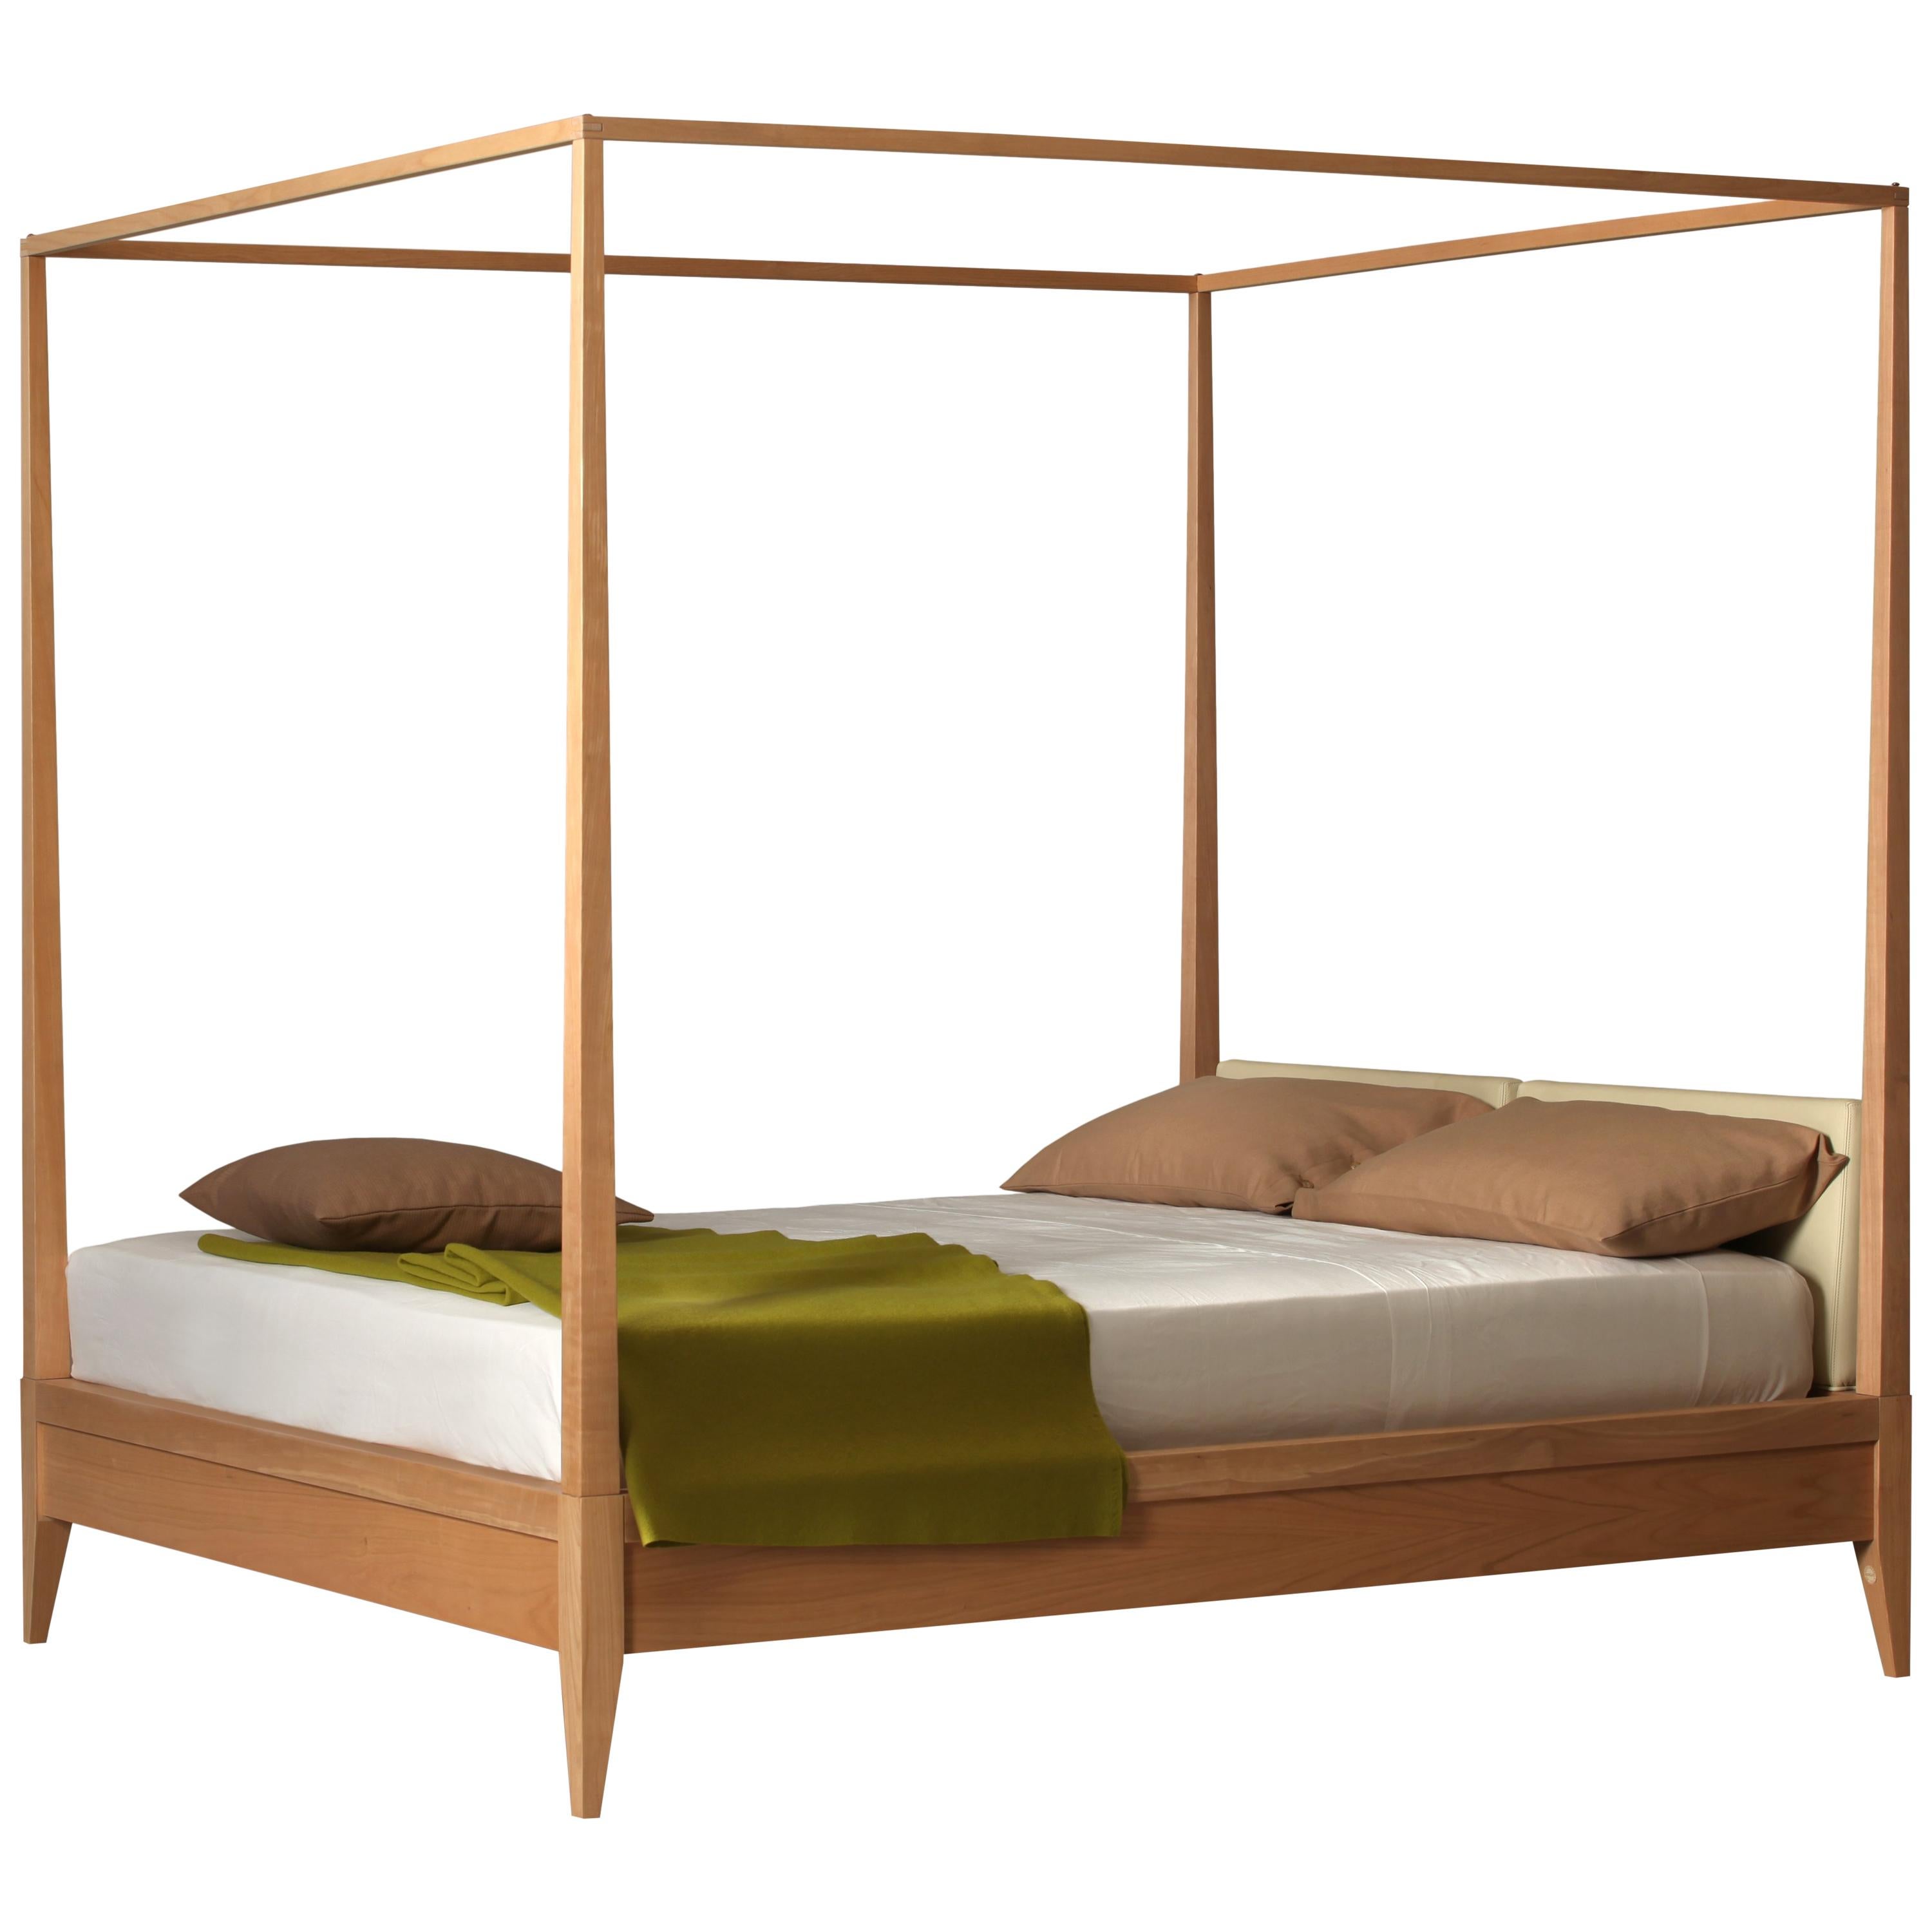 Valentino Canopy Bed Made of Cherrywood with Upholstered Headboard, by Morelato